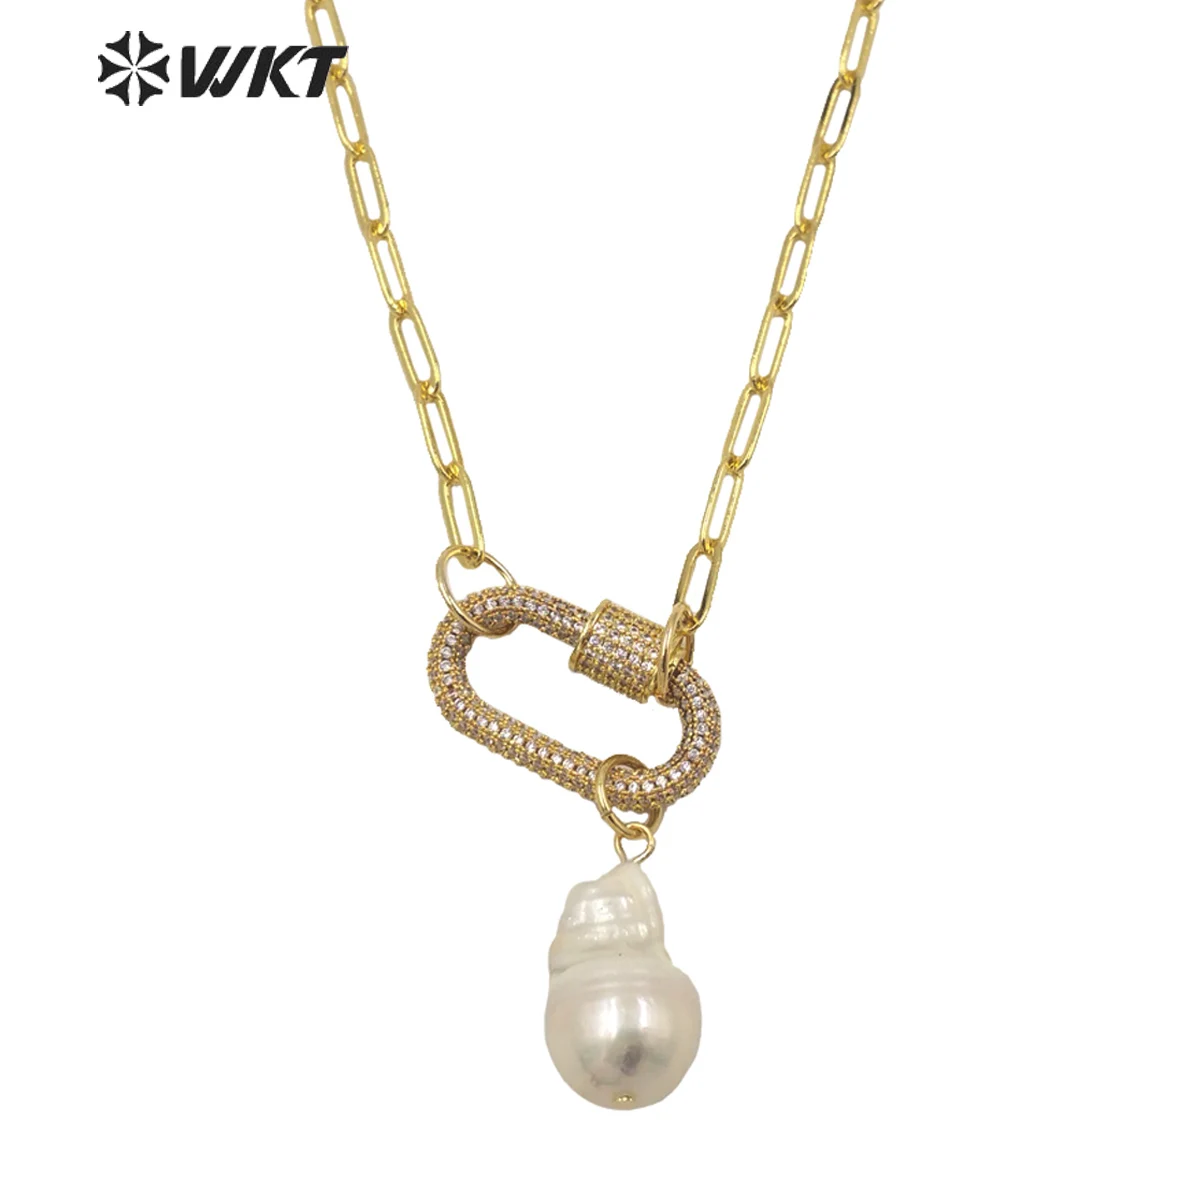 

WT-JN152 Wholesale Fashion Gorgeous Natural Freshwater Baroque Necklace Gold Micropave CZ Clasp Decorative Pearl Decorated